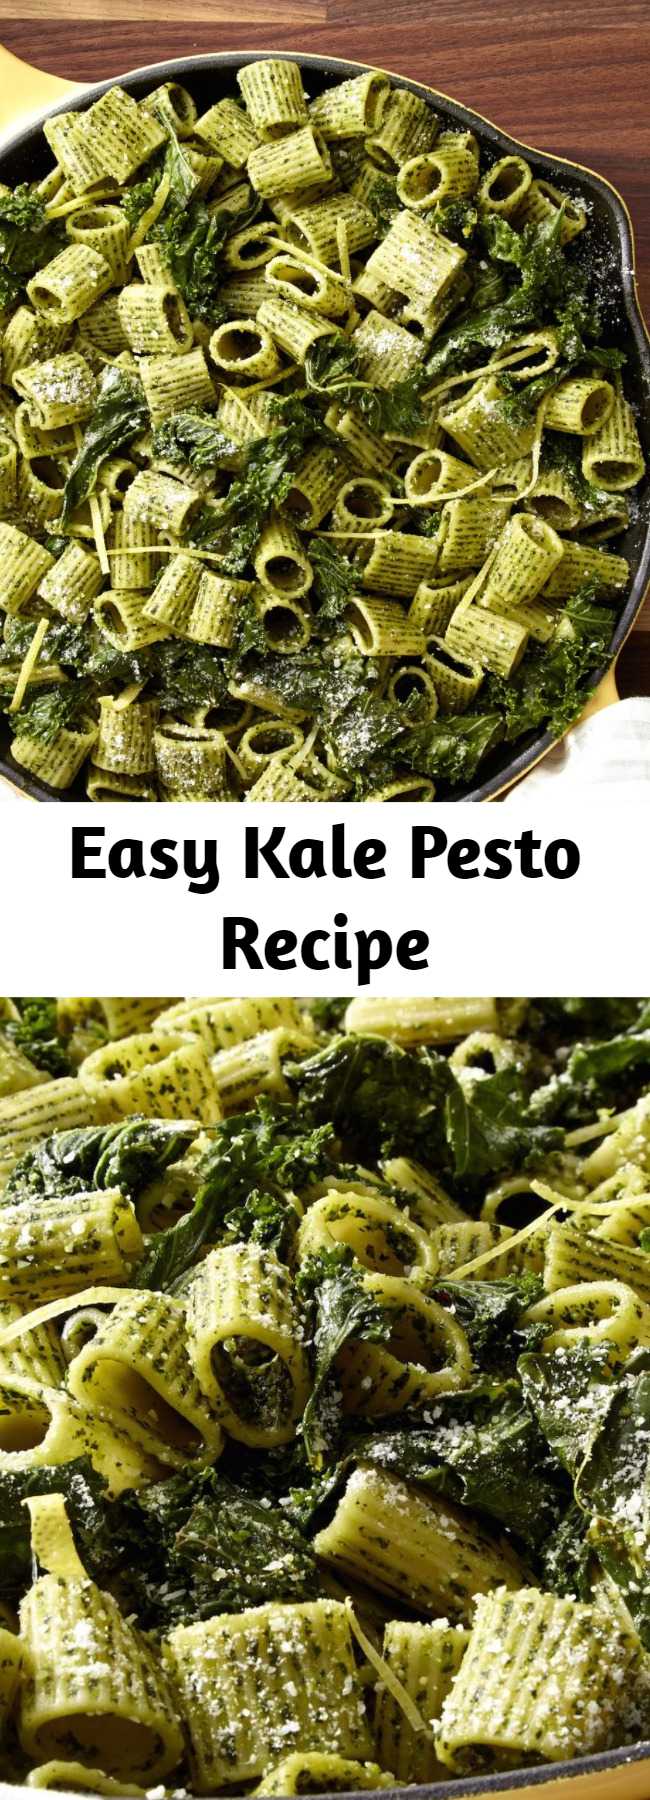 Easy Kale Pesto Recipe - Looking for an easy pesto recipe? This Kale Pesto recipe is the best. If you're a kale-aholic, this dark-green pesto will become an instant fave. This recipe makes enough sauce for a pound of pasta!